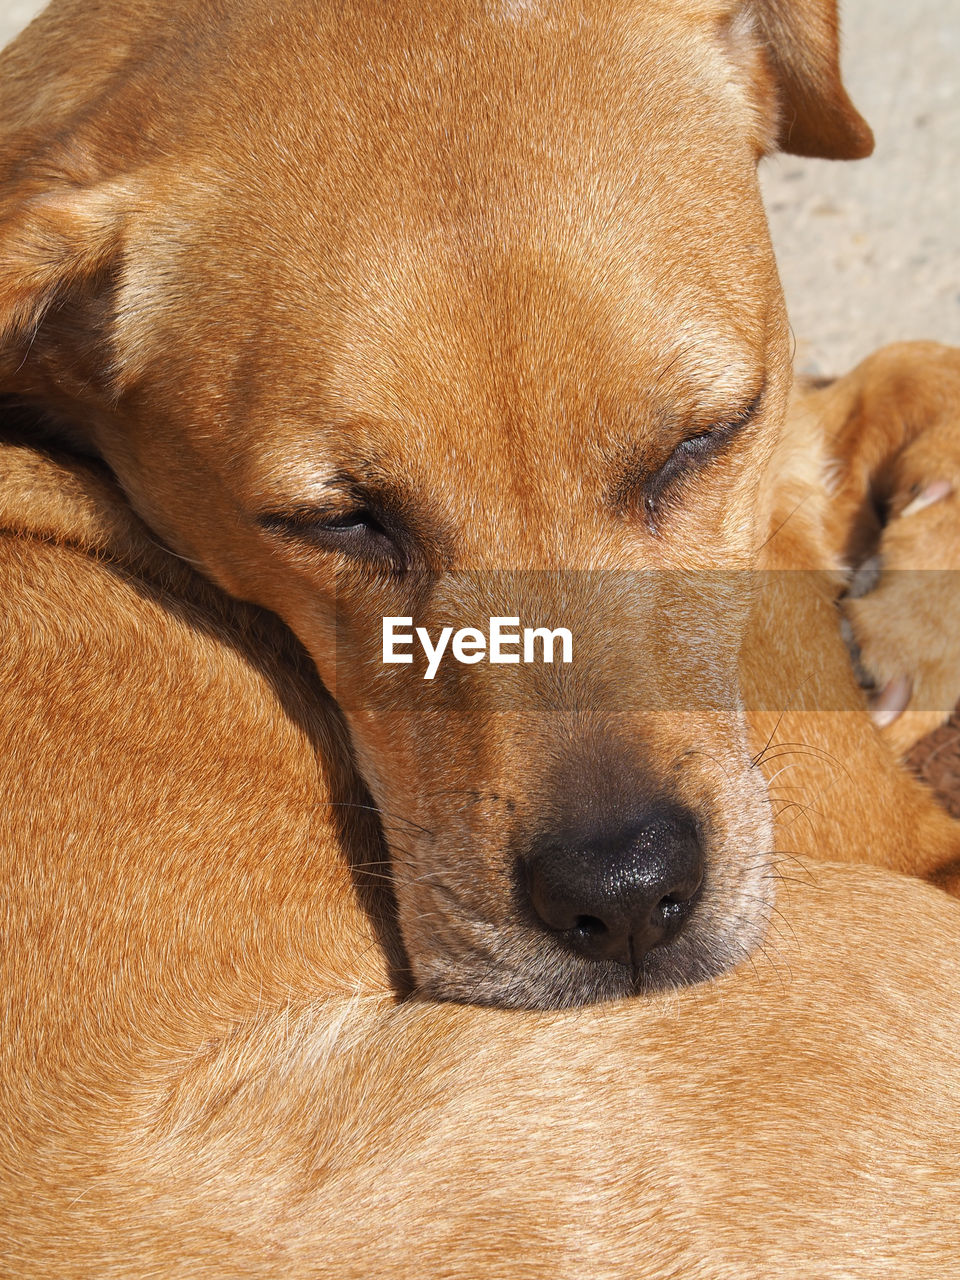 pet, animal, animal themes, dog, mammal, one animal, canine, domestic animals, nose, brown, relaxation, snout, puppy, animal body part, no people, close-up, animal head, resting, portrait, lying down, carnivore, rhodesian ridgeback, sleeping, black mouth cur